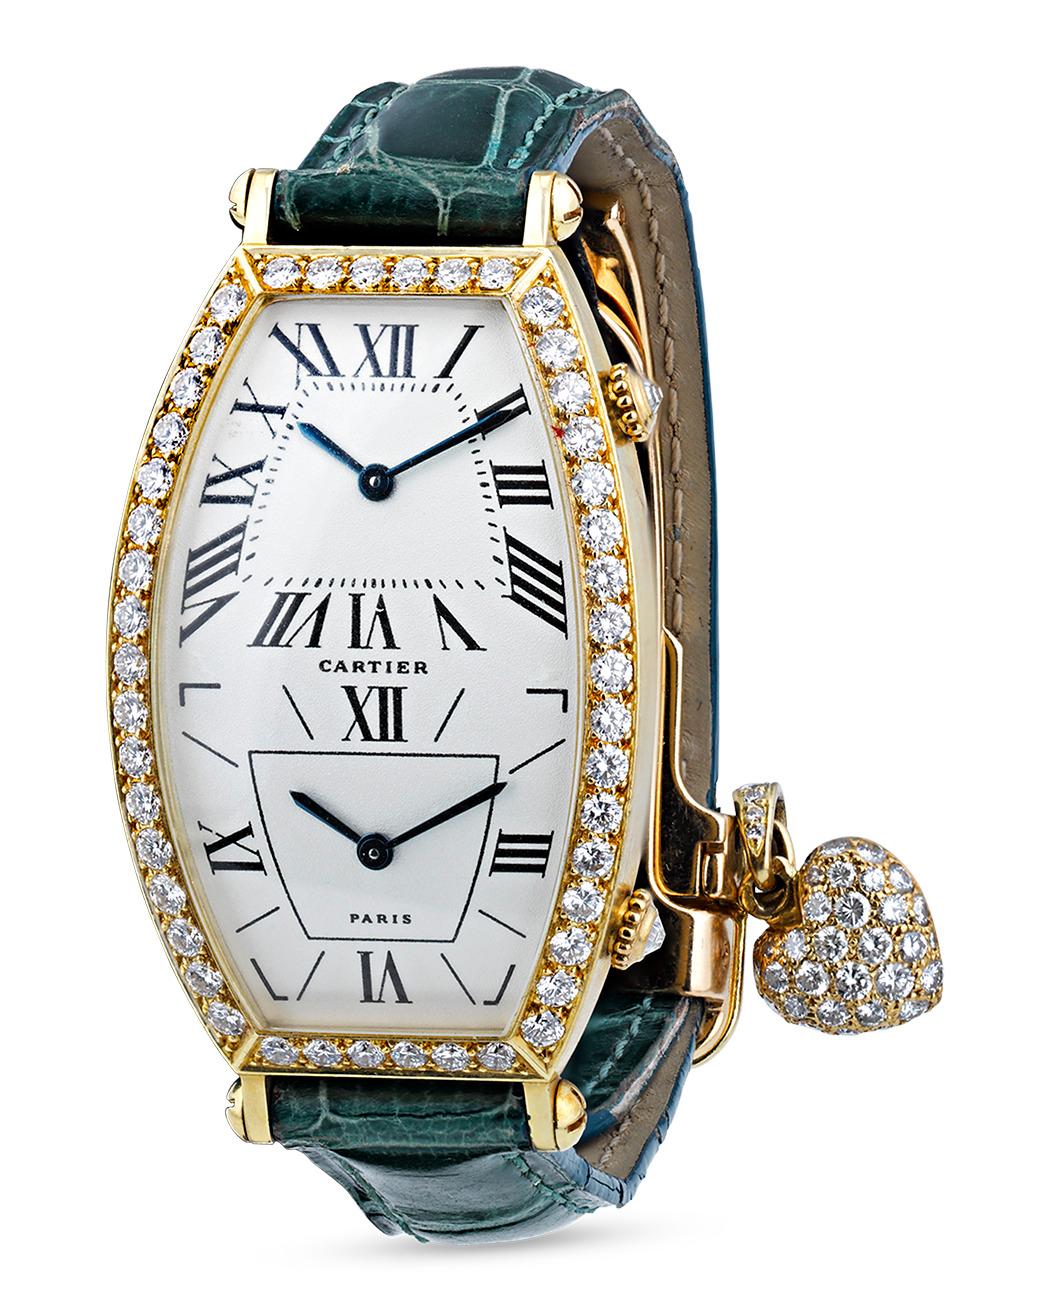 This stylish dual time tonneau wristwatch exemplifies the timeless artistry of Cartier’s legacy. The sleek design exhibits an 18K white gold tonneau case with brilliant factory-set diamonds emblazoning the bezel and crown. The elongated dial